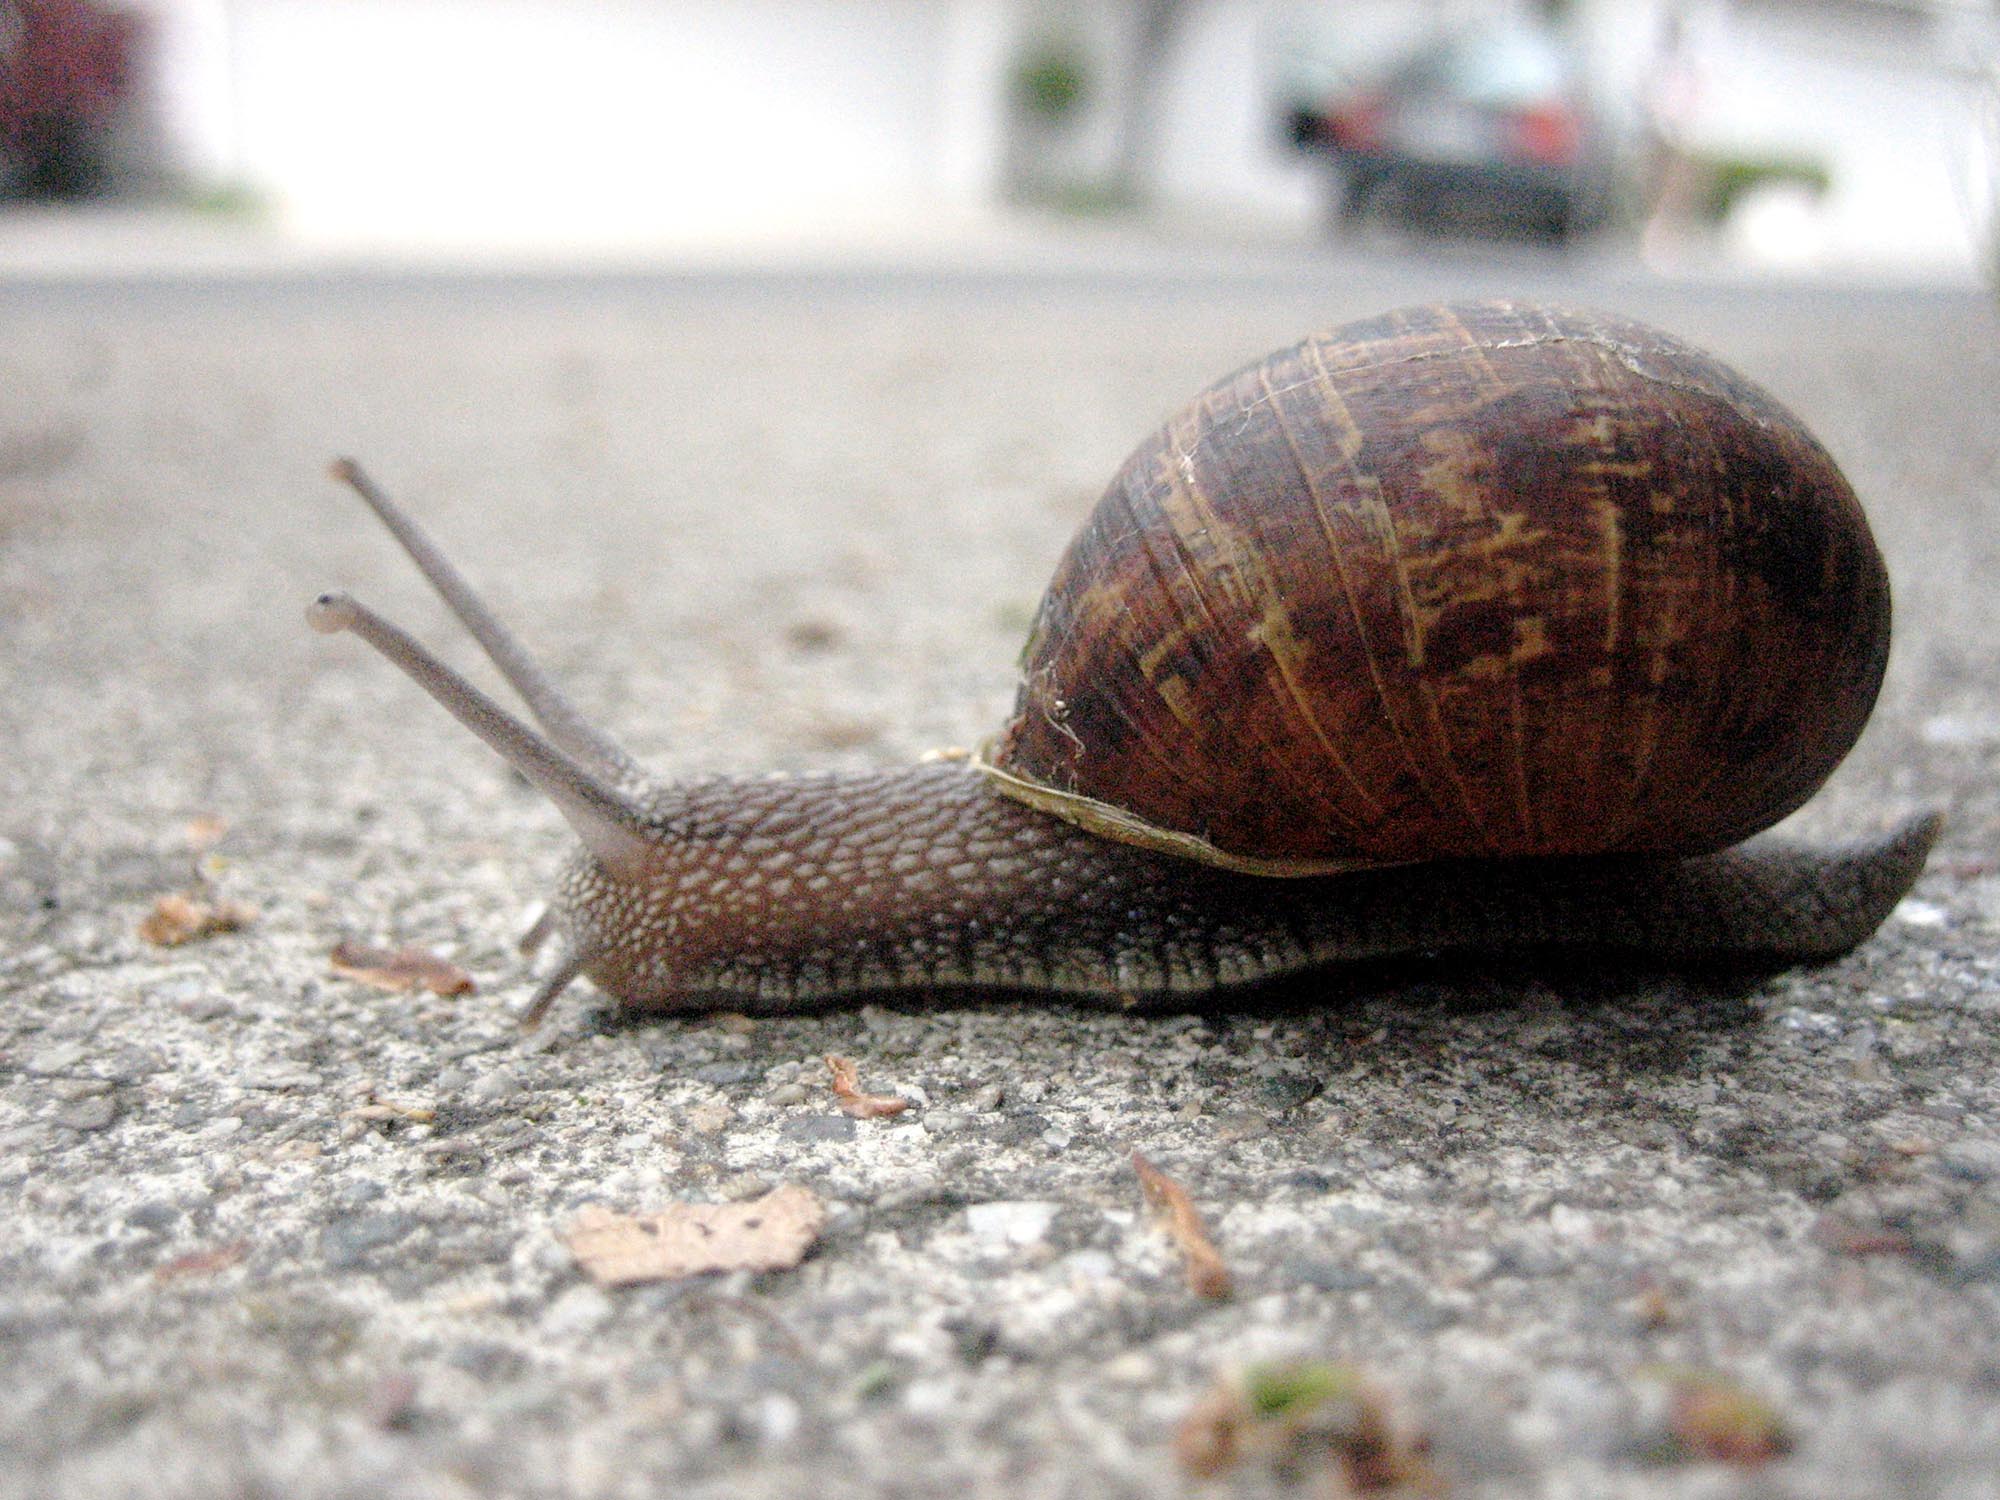 Is it cruel to have a pet snail?